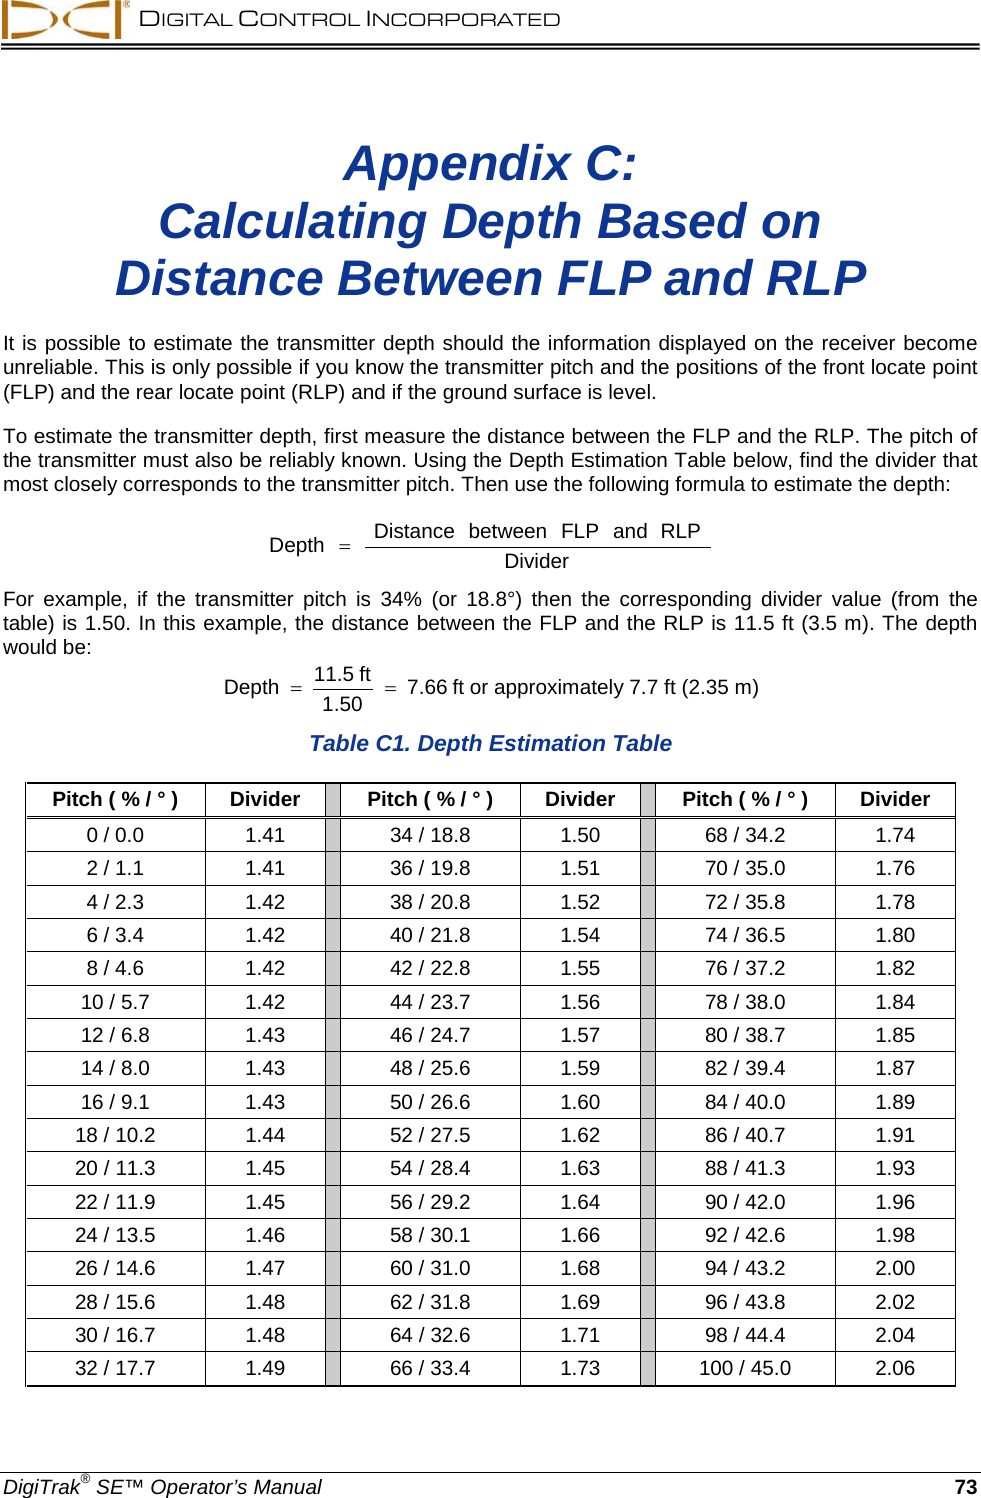  DIGITAL CONTROL INCORPORATED  DigiTrak® SE™ Operator’s Manual 73 Appendix C: Calculating Depth Based on Distance Between FLP and RLP  It is possible to estimate the transmitter depth should the information displayed on the receiver become unreliable. This is only possible if you know the transmitter pitch and the positions of the front locate point (FLP) and the rear locate point (RLP) and if the ground surface is level.  To estimate the transmitter depth, first measure the distance between the FLP and the RLP. The pitch of the transmitter must also be reliably known. Using the Depth Estimation Table below, find the divider that most closely corresponds to the transmitter pitch. Then use the following formula to estimate the depth: DividerRLPandFLPbetweenDistanceDepth = For example, if the transmitter pitch is 34% (or 18.8°) then the corresponding divider value (from the table) is 1.50. In this example, the distance between the FLP and the RLP is 11.5 ft (3.5 m). The depth would be: 7.661.50ft 11.5Depth == ft or approximately 7.7 ft (2.35 m)  Table C1. Depth Estimation Table Pitch ( % / ° ) Divider    Pitch ( % / ° ) Divider    Pitch ( % / ° ) Divider 0 / 0.0 1.41    34 / 18.8 1.50    68 / 34.2 1.74 2 / 1.1 1.41    36 / 19.8 1.51    70 / 35.0 1.76 4 / 2.3 1.42    38 / 20.8 1.52    72 / 35.8 1.78 6 / 3.4 1.42    40 / 21.8 1.54    74 / 36.5 1.80 8 / 4.6 1.42    42 / 22.8 1.55    76 / 37.2 1.82 10 / 5.7 1.42    44 / 23.7 1.56    78 / 38.0 1.84 12 / 6.8 1.43    46 / 24.7 1.57    80 / 38.7 1.85 14 / 8.0 1.43    48 / 25.6 1.59    82 / 39.4 1.87 16 / 9.1 1.43    50 / 26.6 1.60    84 / 40.0 1.89 18 / 10.2 1.44    52 / 27.5 1.62    86 / 40.7 1.91 20 / 11.3 1.45    54 / 28.4 1.63    88 / 41.3 1.93 22 / 11.9 1.45    56 / 29.2 1.64    90 / 42.0 1.96 24 / 13.5 1.46    58 / 30.1 1.66    92 / 42.6 1.98 26 / 14.6 1.47    60 / 31.0 1.68    94 / 43.2 2.00 28 / 15.6 1.48    62 / 31.8 1.69    96 / 43.8 2.02 30 / 16.7 1.48    64 / 32.6 1.71    98 / 44.4 2.04 32 / 17.7 1.49    66 / 33.4 1.73    100 / 45.0 2.06 